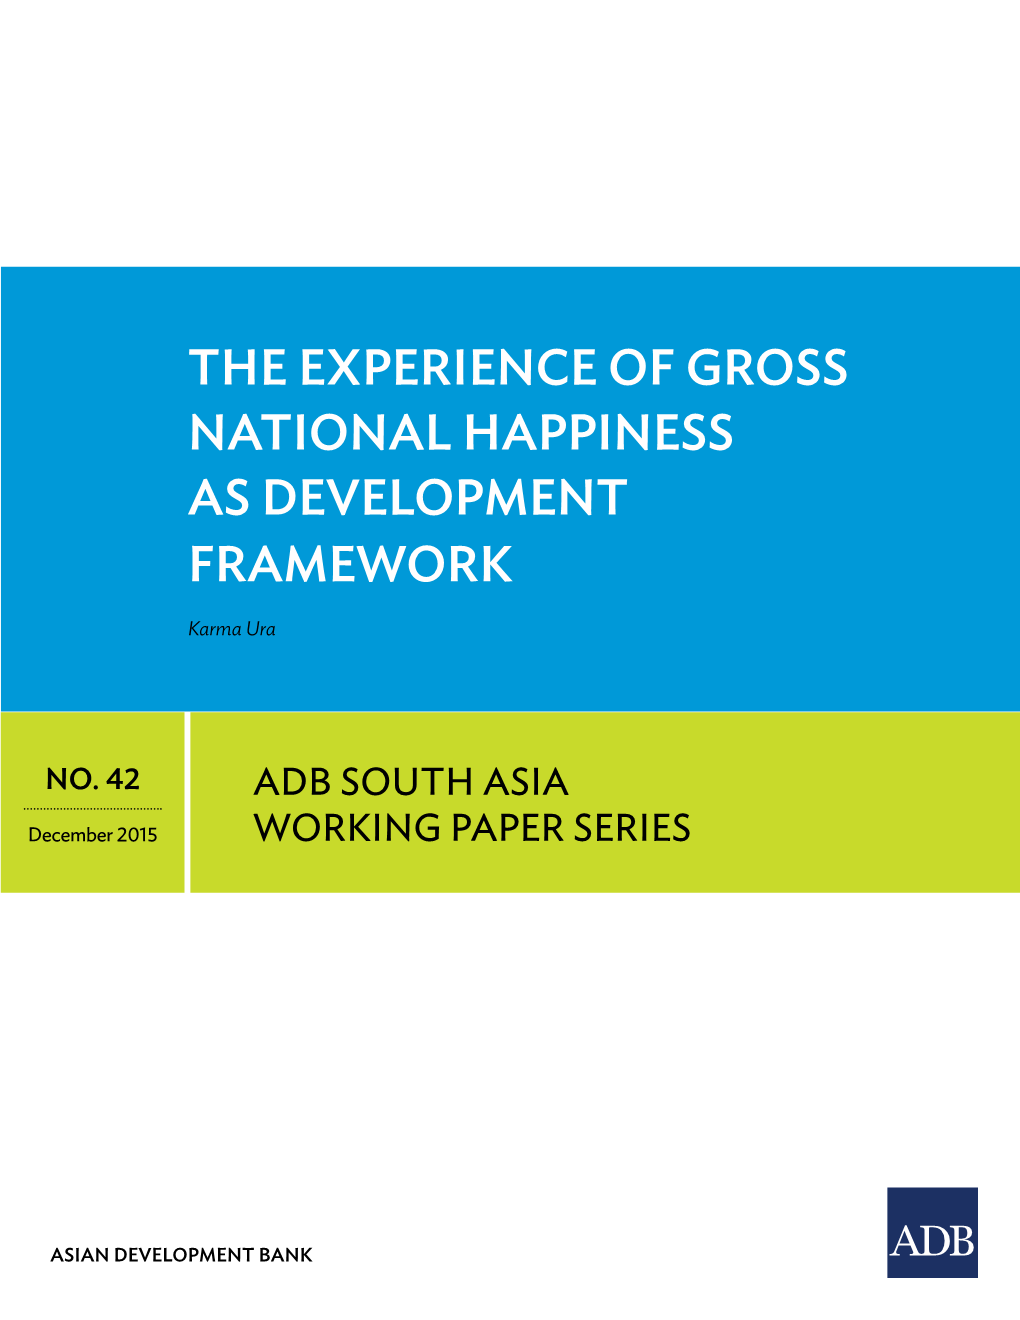 The Experience of Gross National Happiness As Development Framework